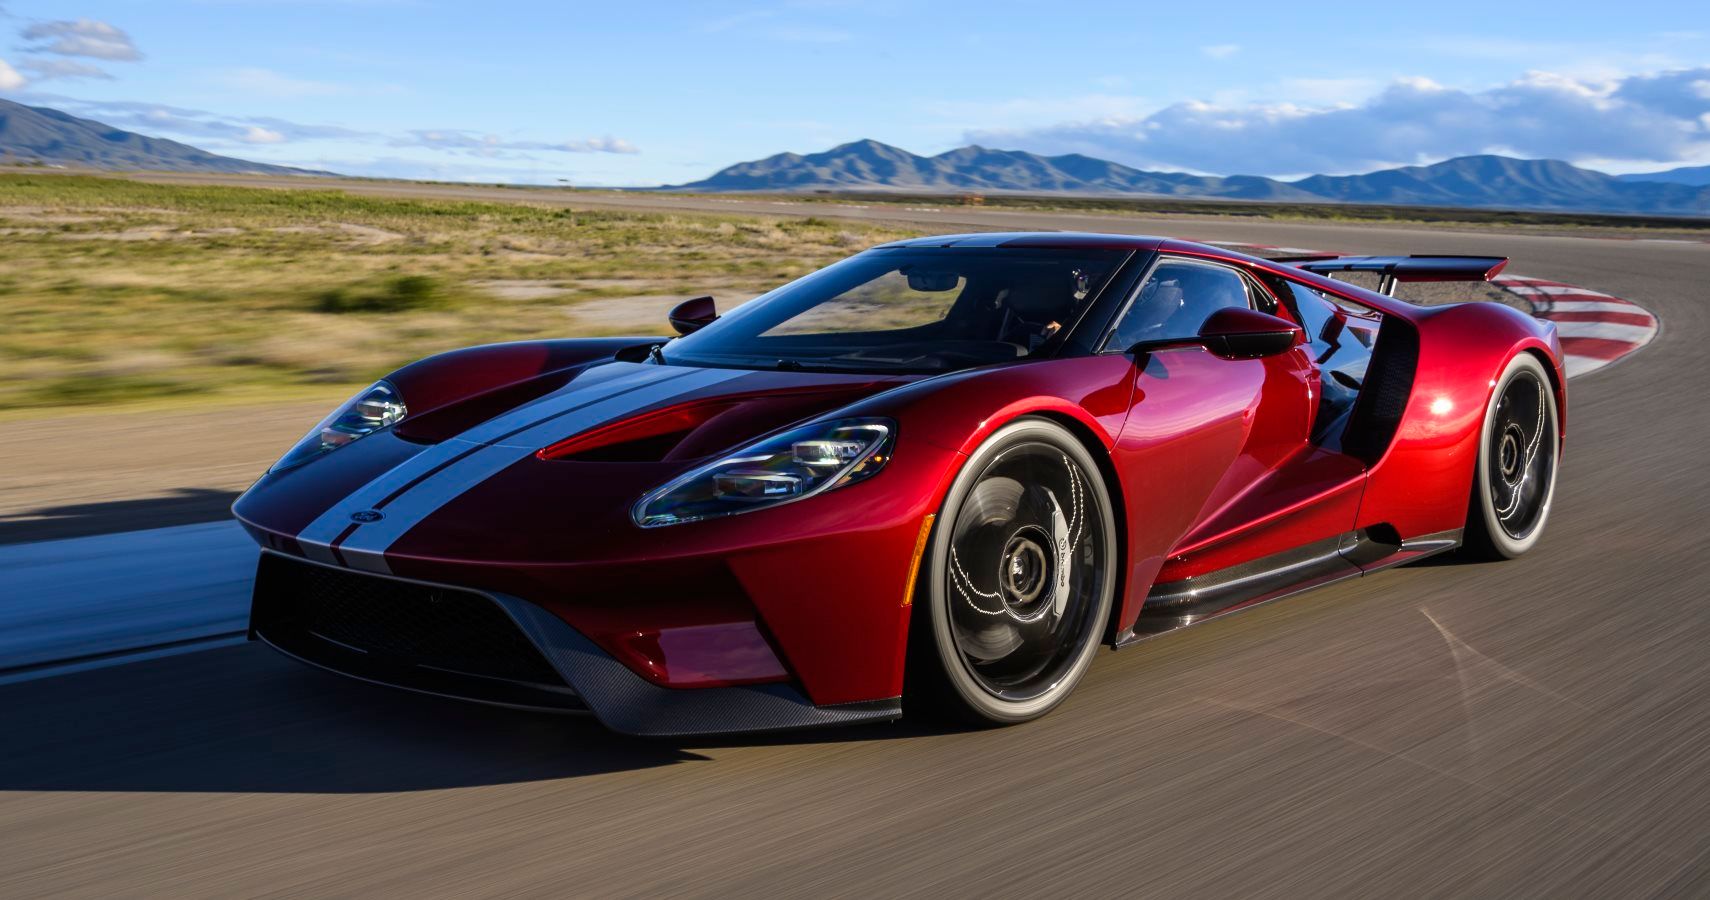 Mecum Auctions And Ford Reach Settlement On Auctioned-Off GT